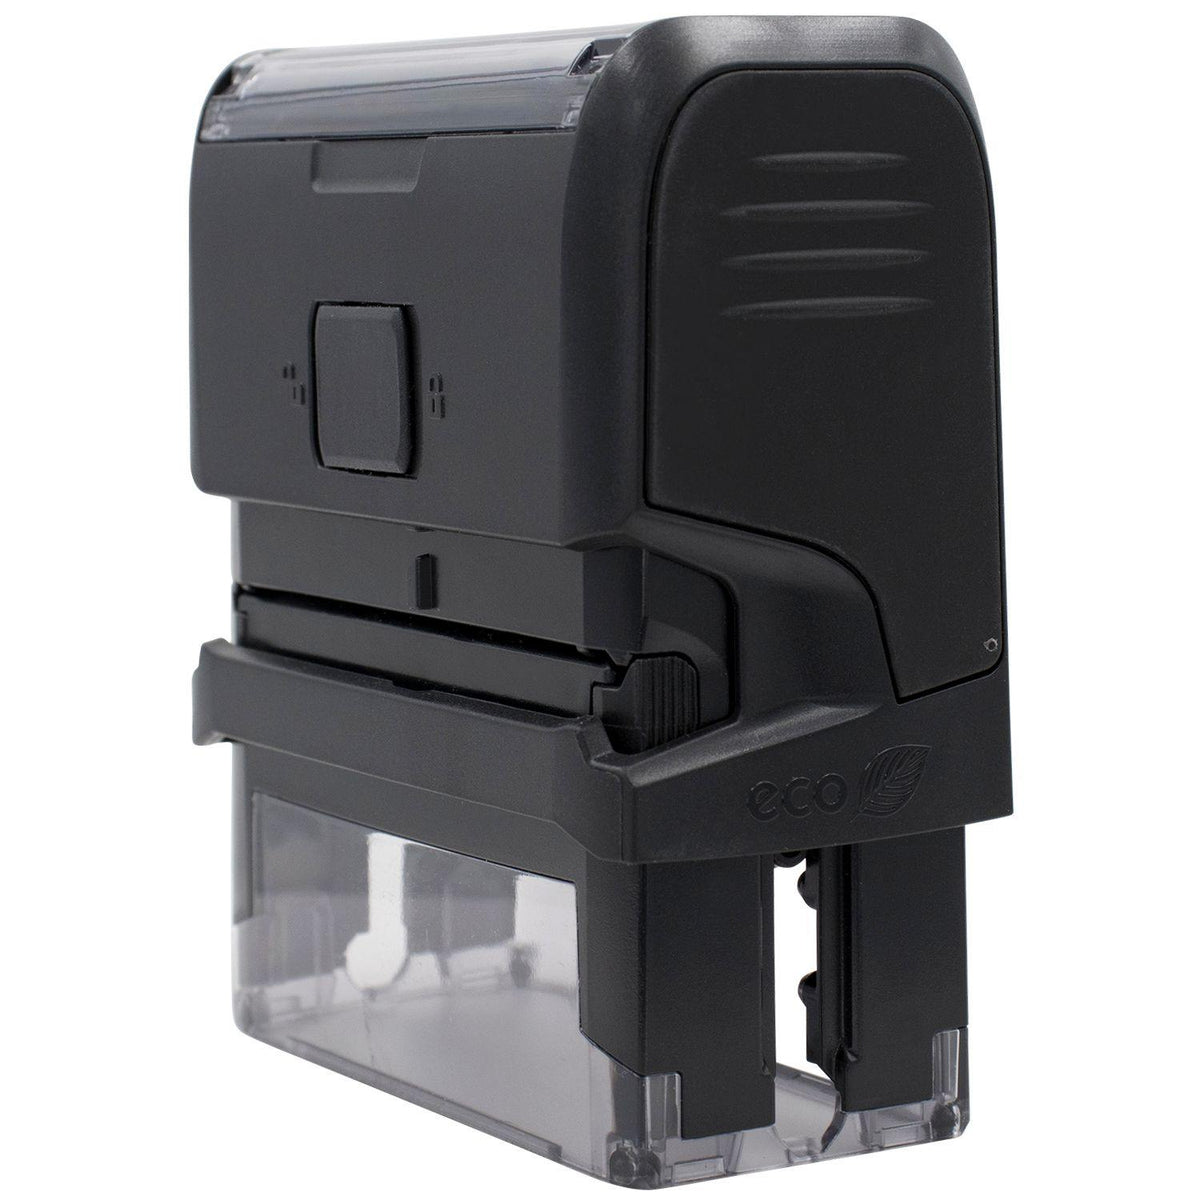 Self-Inking Skinny Rush Stamp - Engineer Seal Stamps - Brand_Trodat, Impression Size_Small, Stamp Type_Self-Inking Stamp, Type of Use_Postal &amp; Mailing, Type of Use_Shipping &amp; Receiving